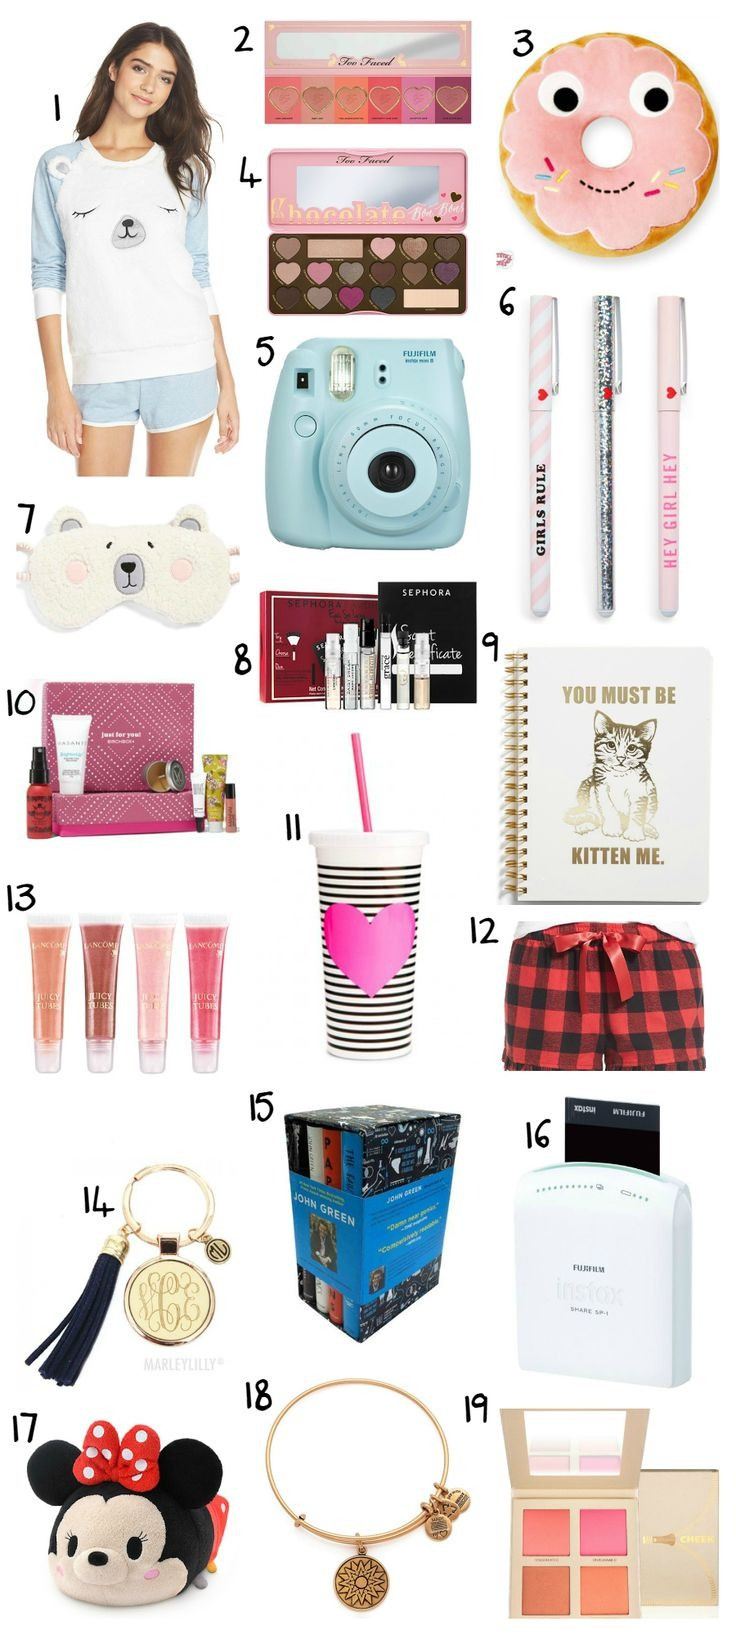 Teenage Girl Birthday Gift Ideas
 What To Get A Teenage Girl For Christmas